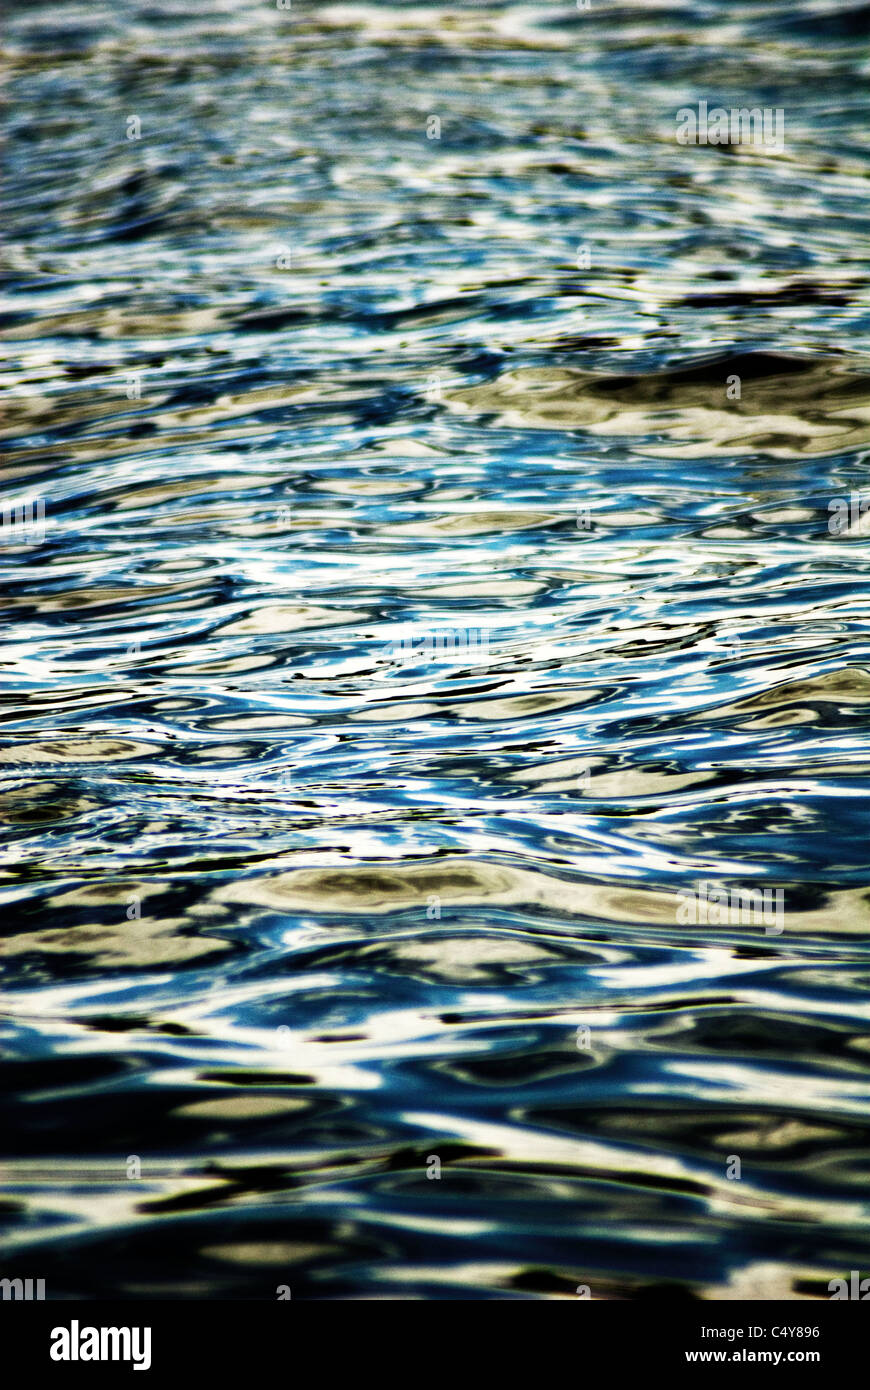 a moody abstract image of the ripples of water on a river Stock Photo